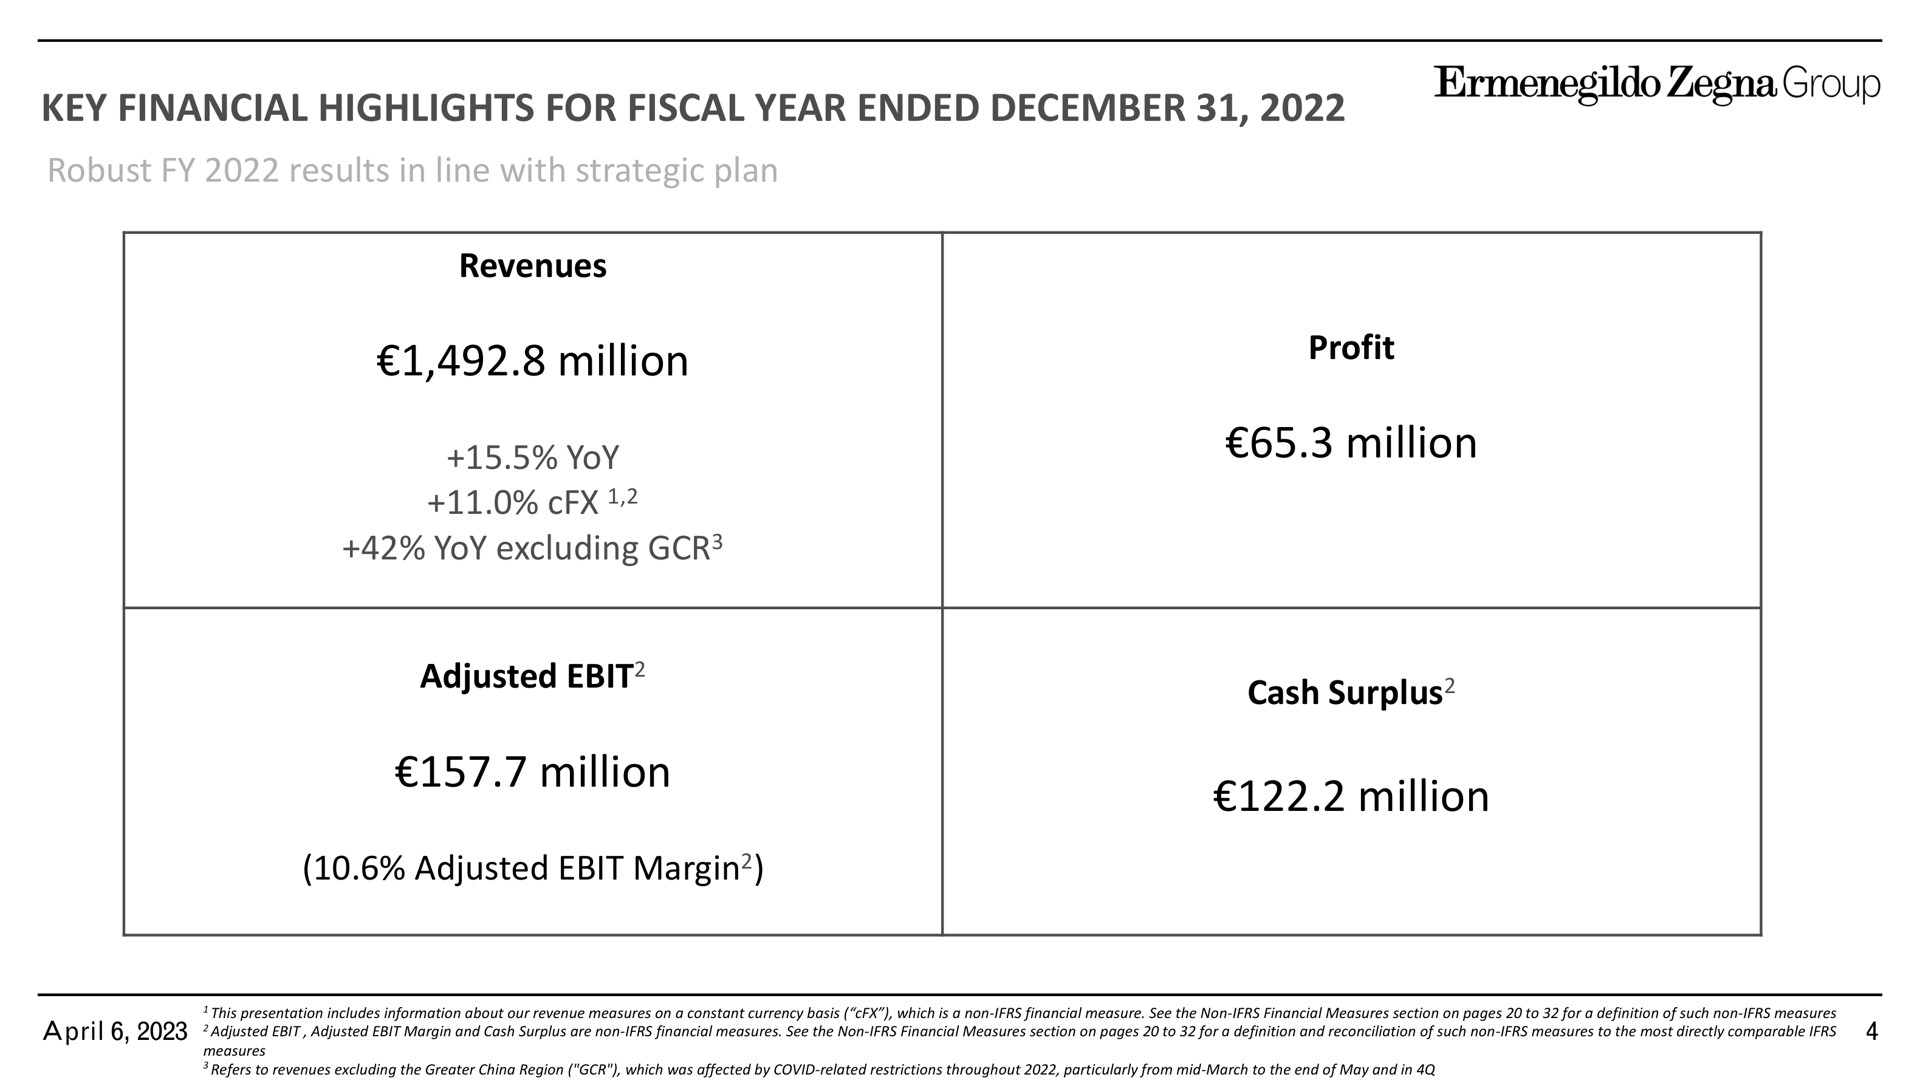 key financial highlights for fiscal year ended robust results in line with strategic plan revenues million yoy yoy excluding adjusted million adjusted margin profit million cash surplus million margin surplus | Zegna